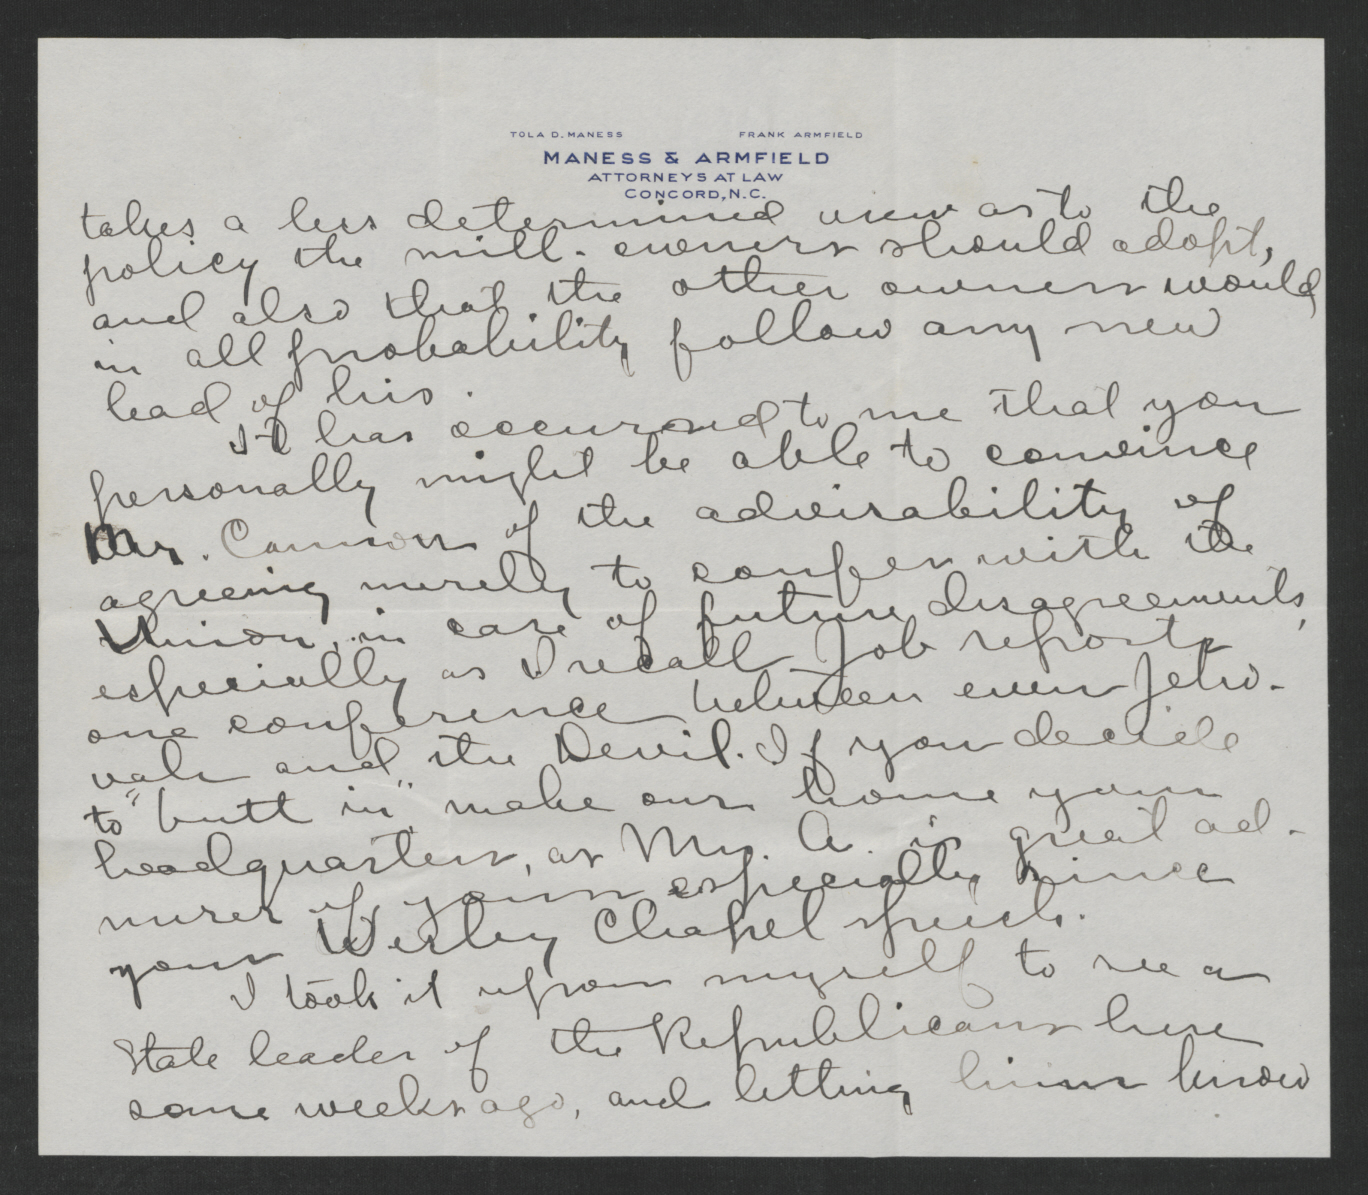 Letter from Frank Armfield to Thomas W. Bickett, June 6, 1919, page 2